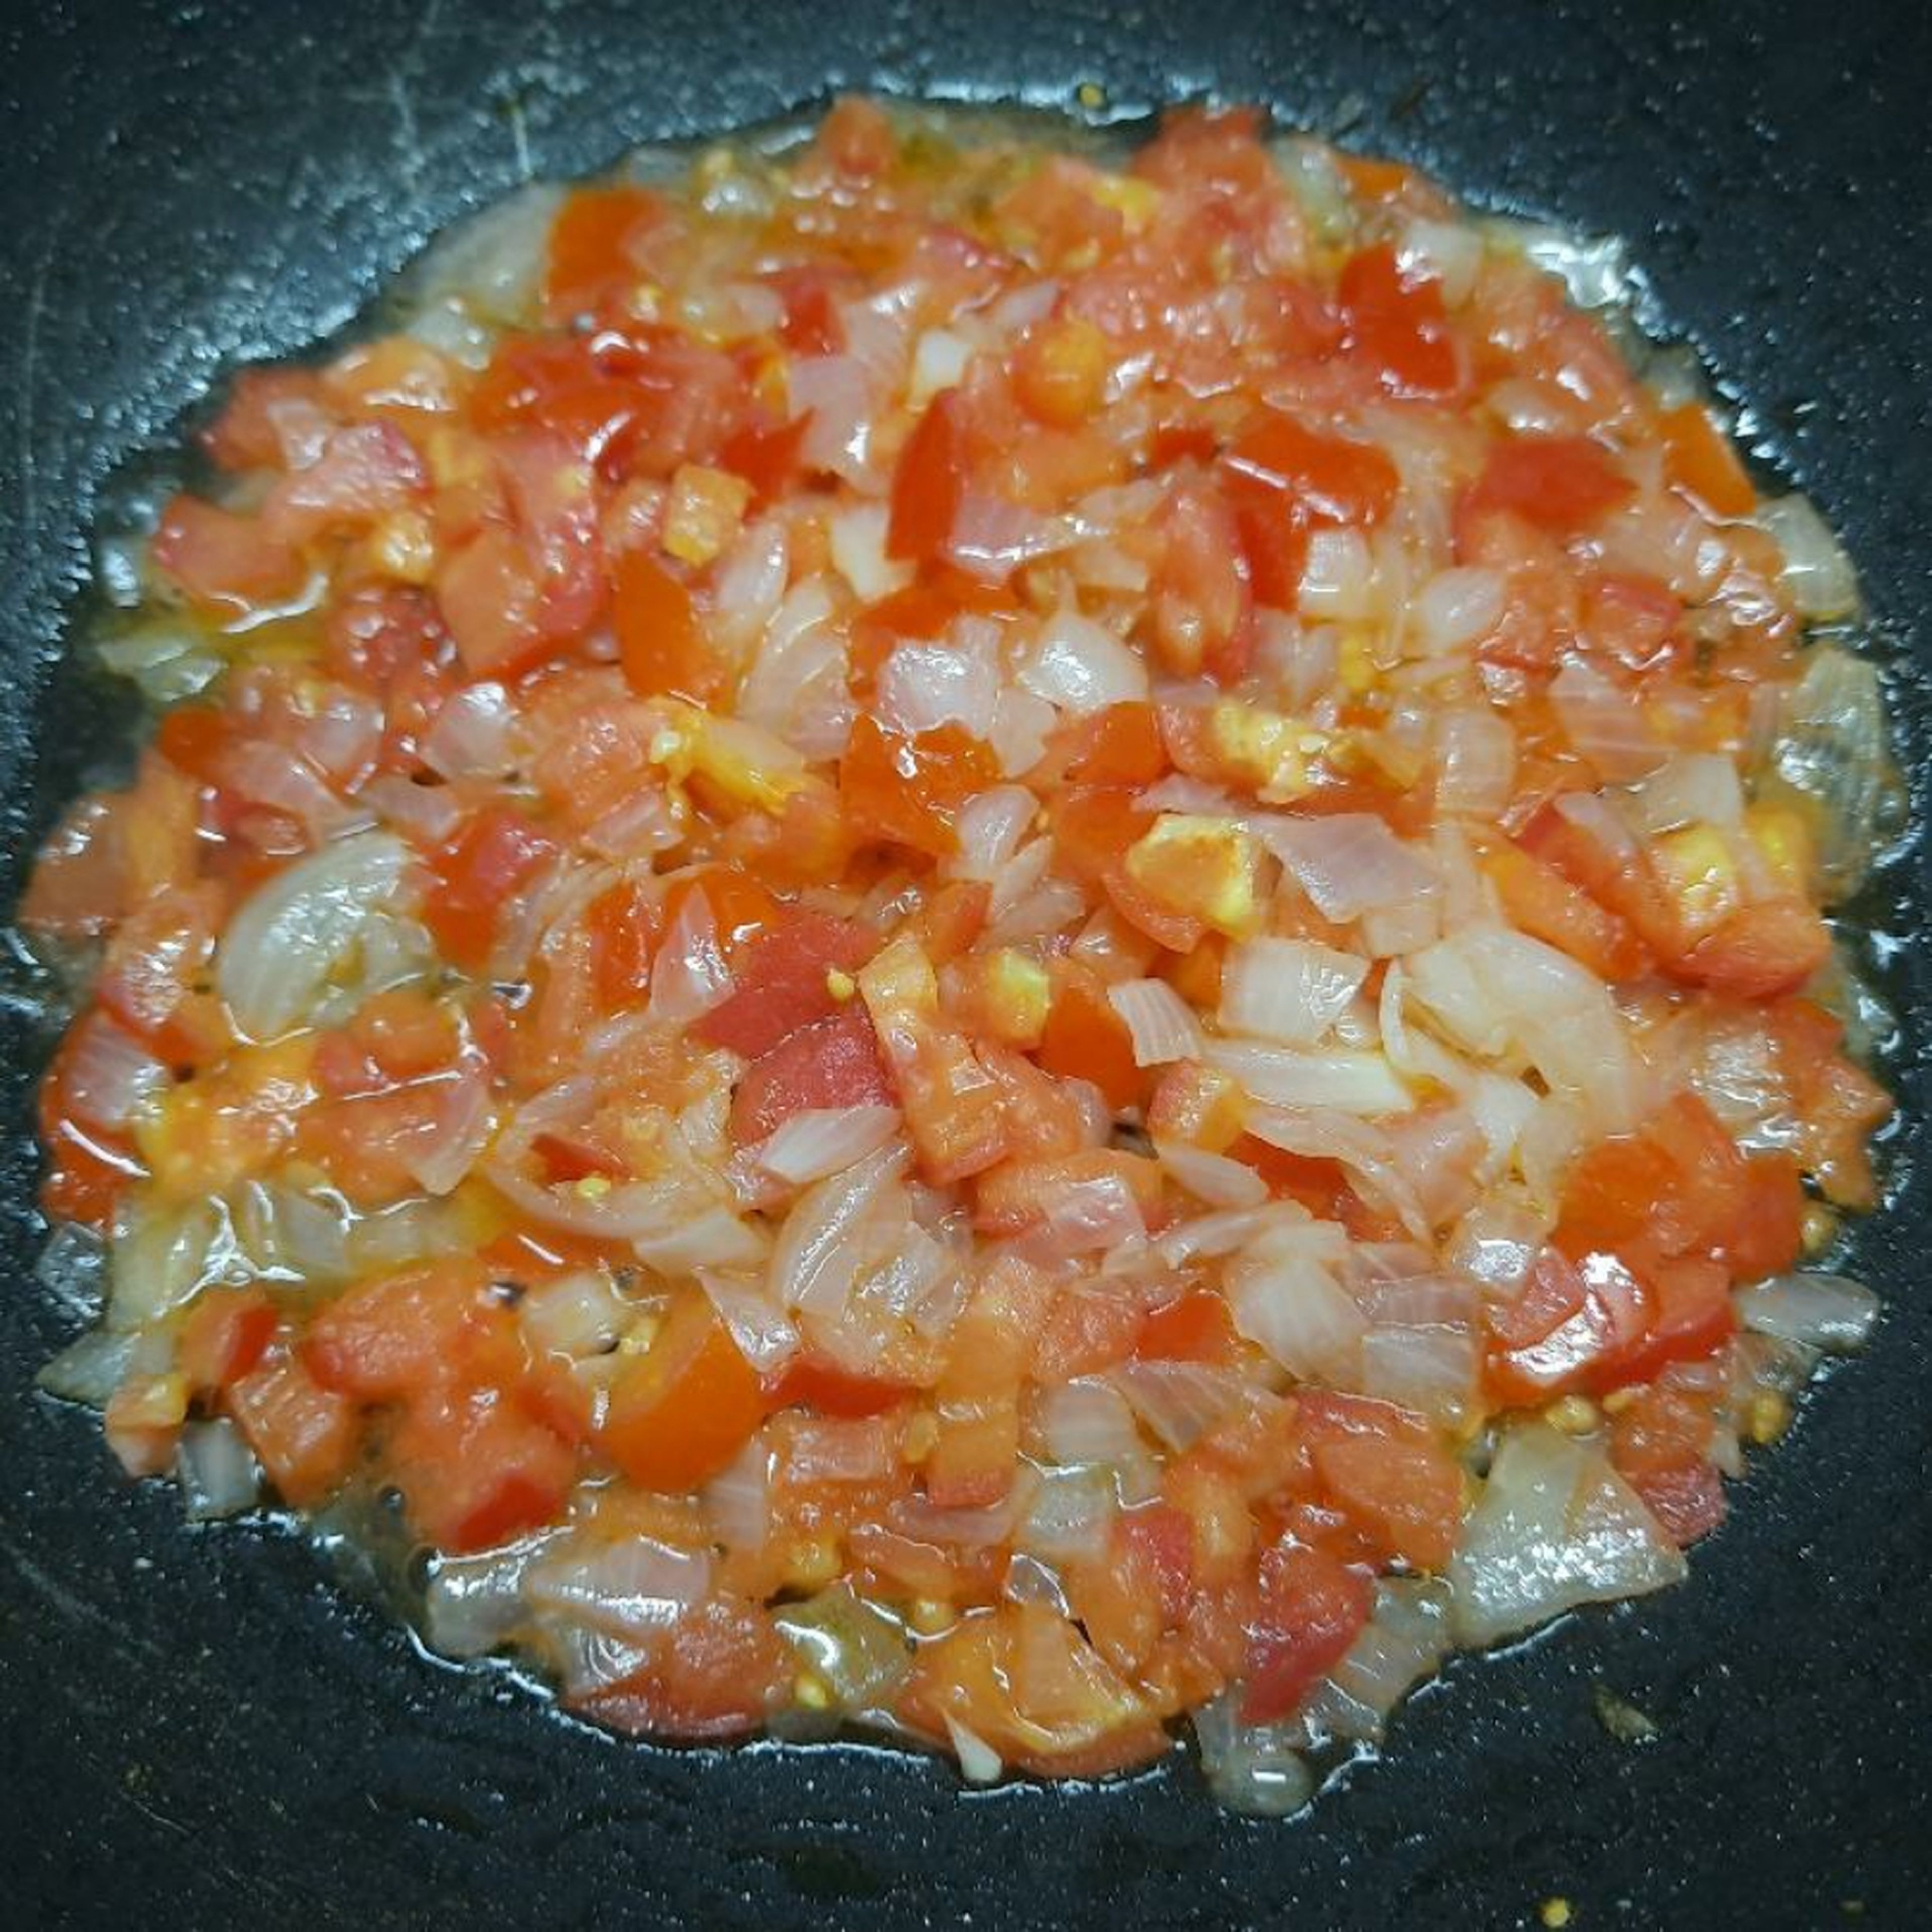 Add the tomato pieces and mix well. Close the lid and let it cook for 2mins. When you open the lid, you should see a little water leaving the mixture. This is the natural water in the tomatoes.